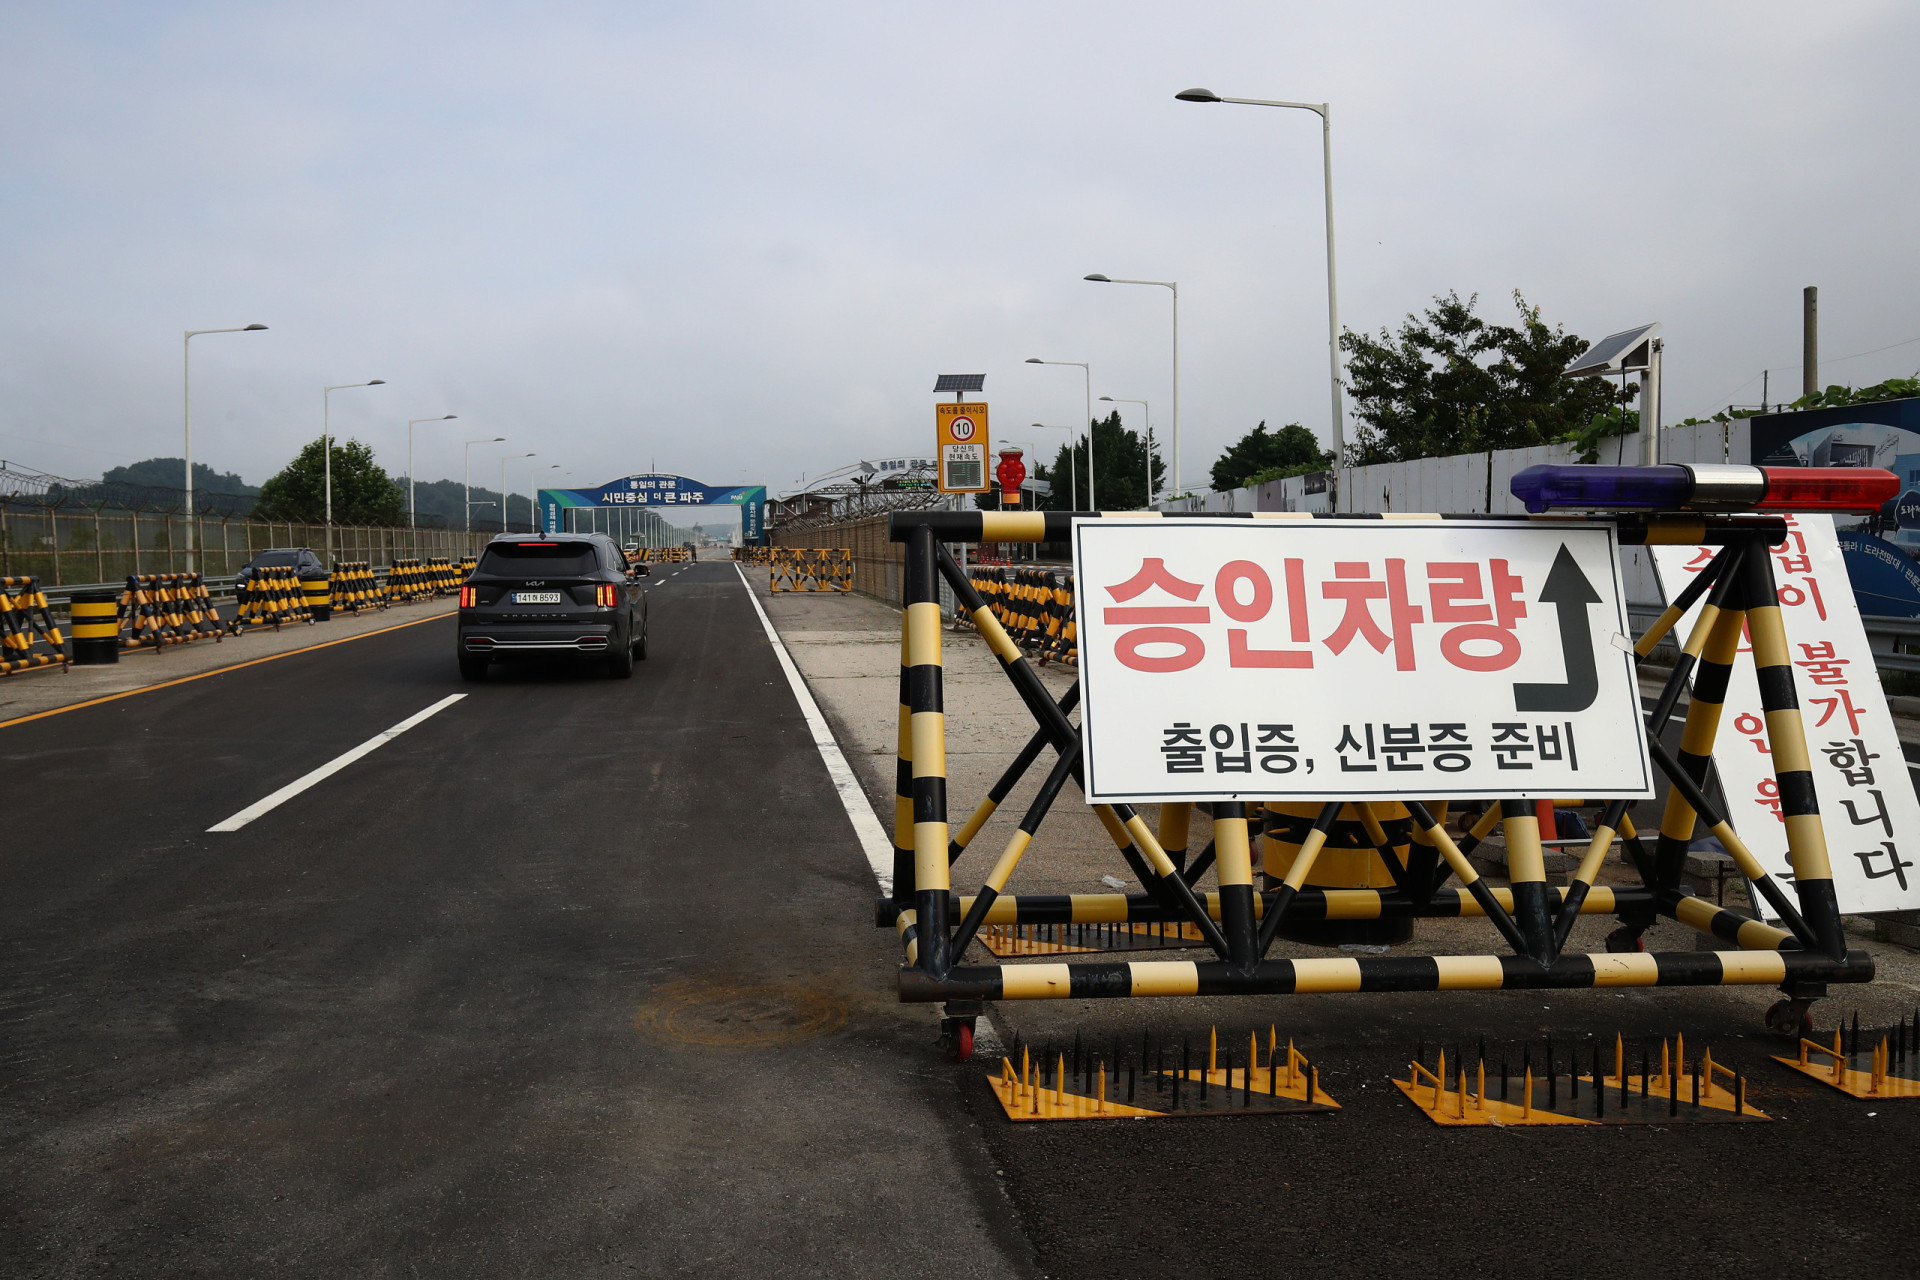 <p>King had spent time in a South Korean prison after a drunken accident, and was supposed to be sent from his deployment back to the United States. It remains unclear why Travis King crossed the border and what happened to him.</p><p>You may also like:<a href="https://www.starsinsider.com/n/171942?utm_source=msn.com&utm_medium=display&utm_campaign=referral_description&utm_content=563464en-en"> The oldest words in the English language</a></p>